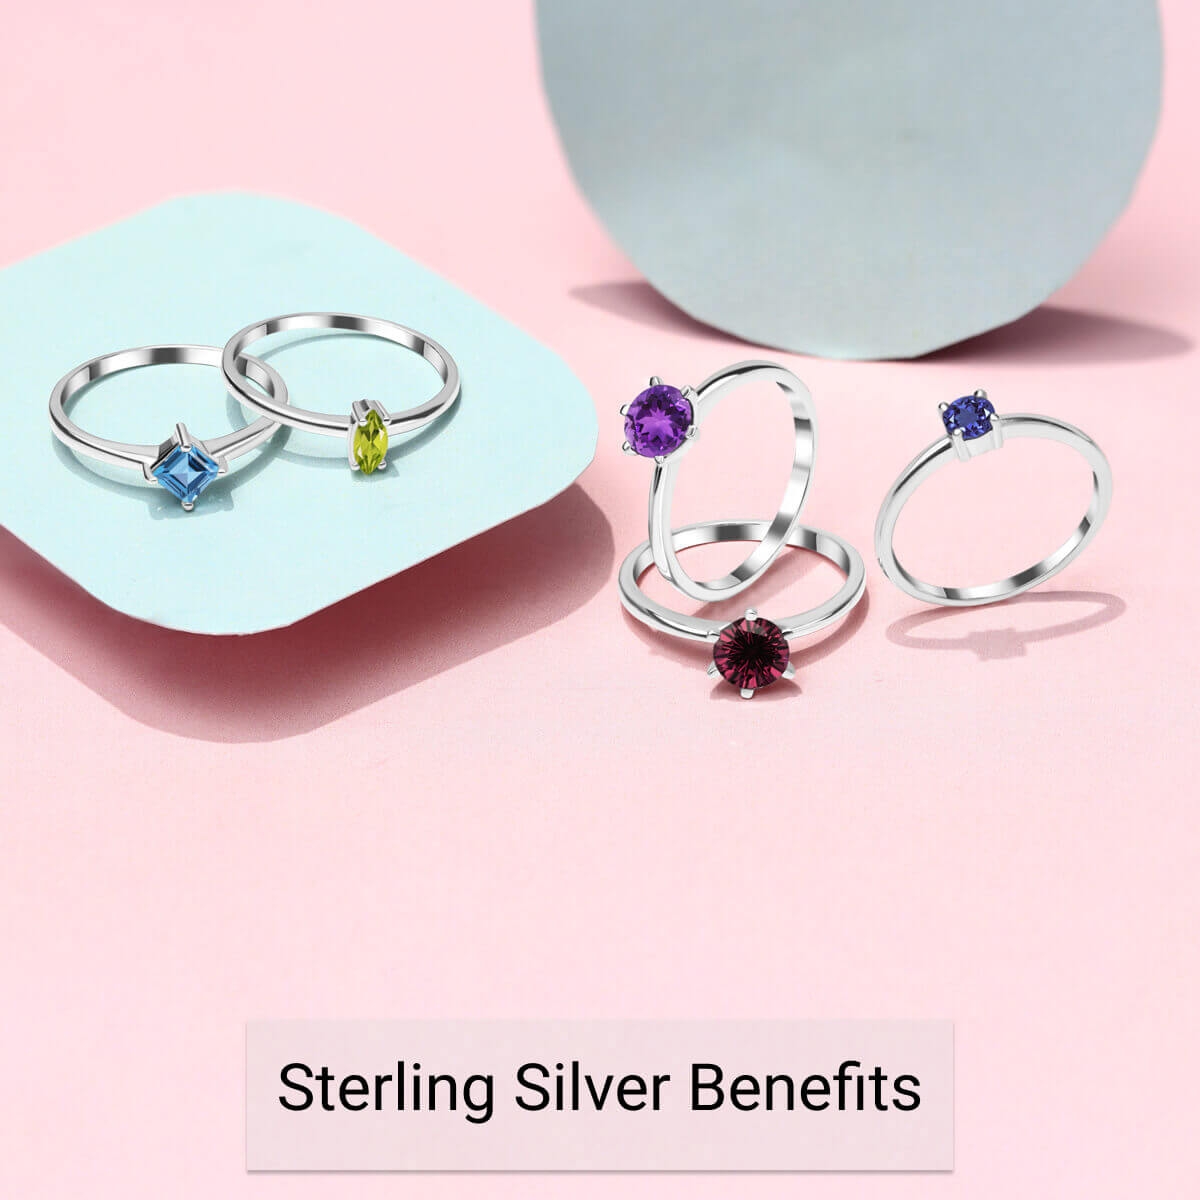 Benefits of Sterling Silver